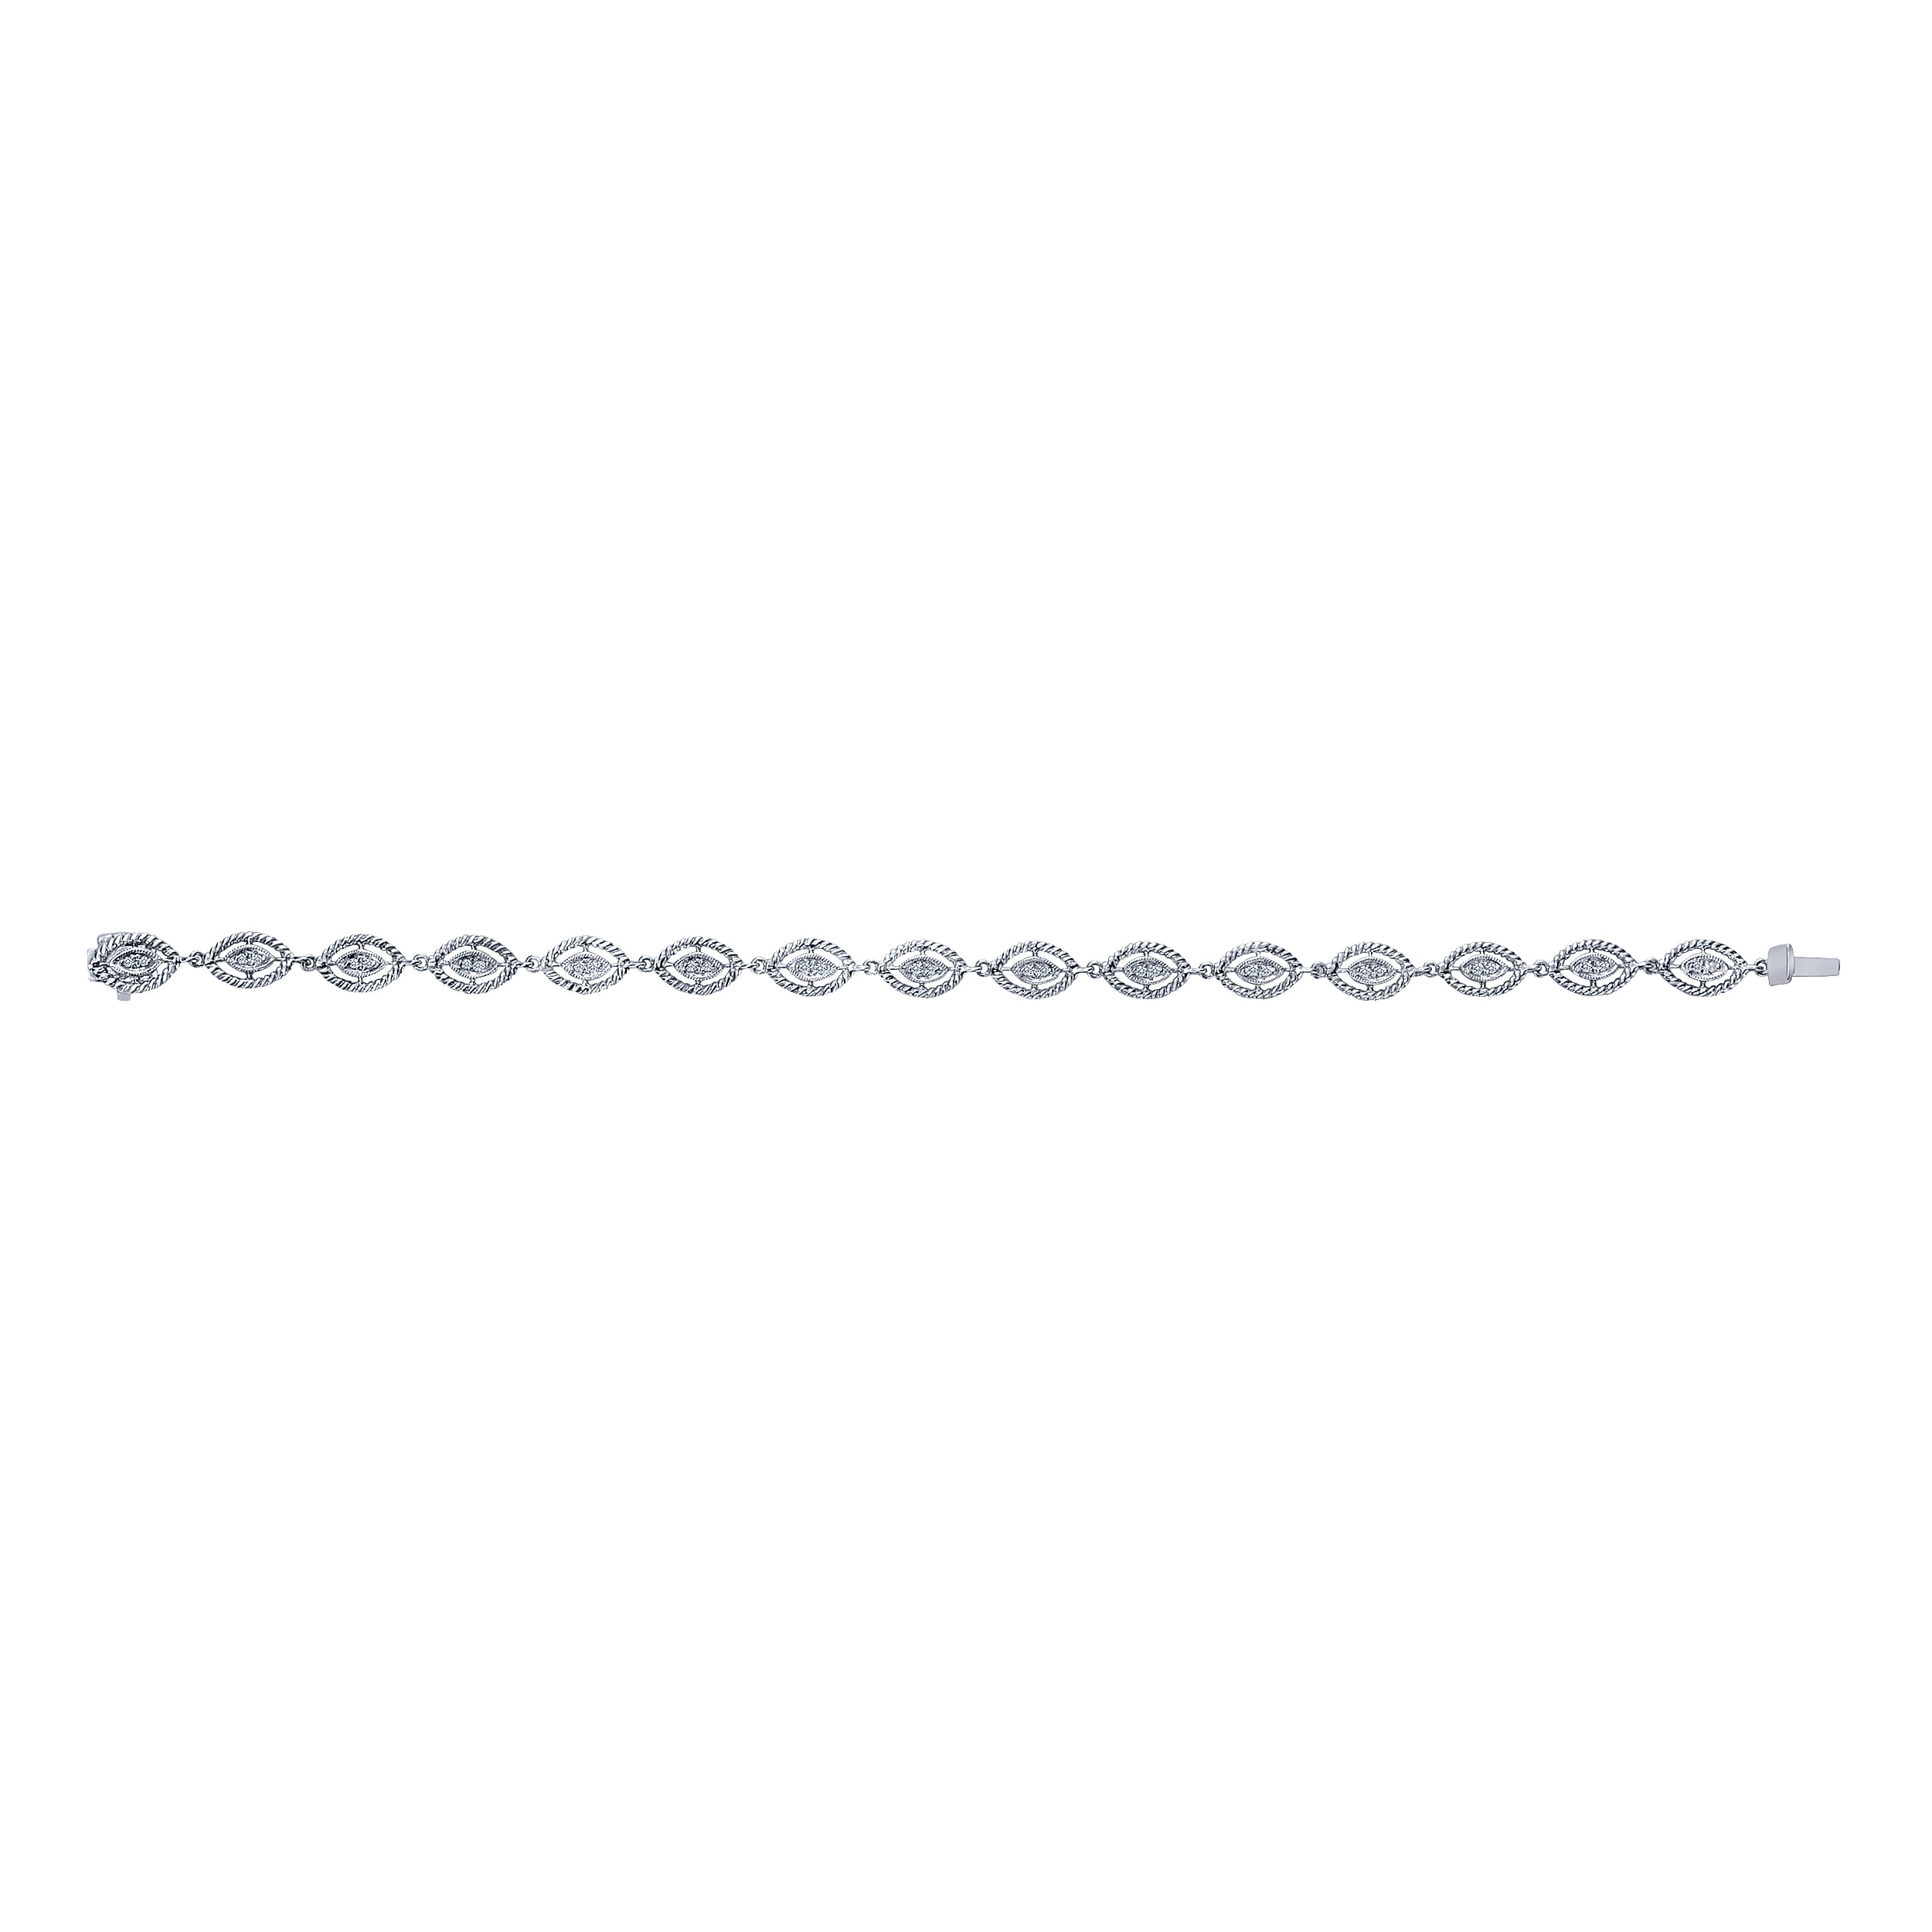 14K White Gold Diamond Tennis Bracelet with Twisted Rope Frame